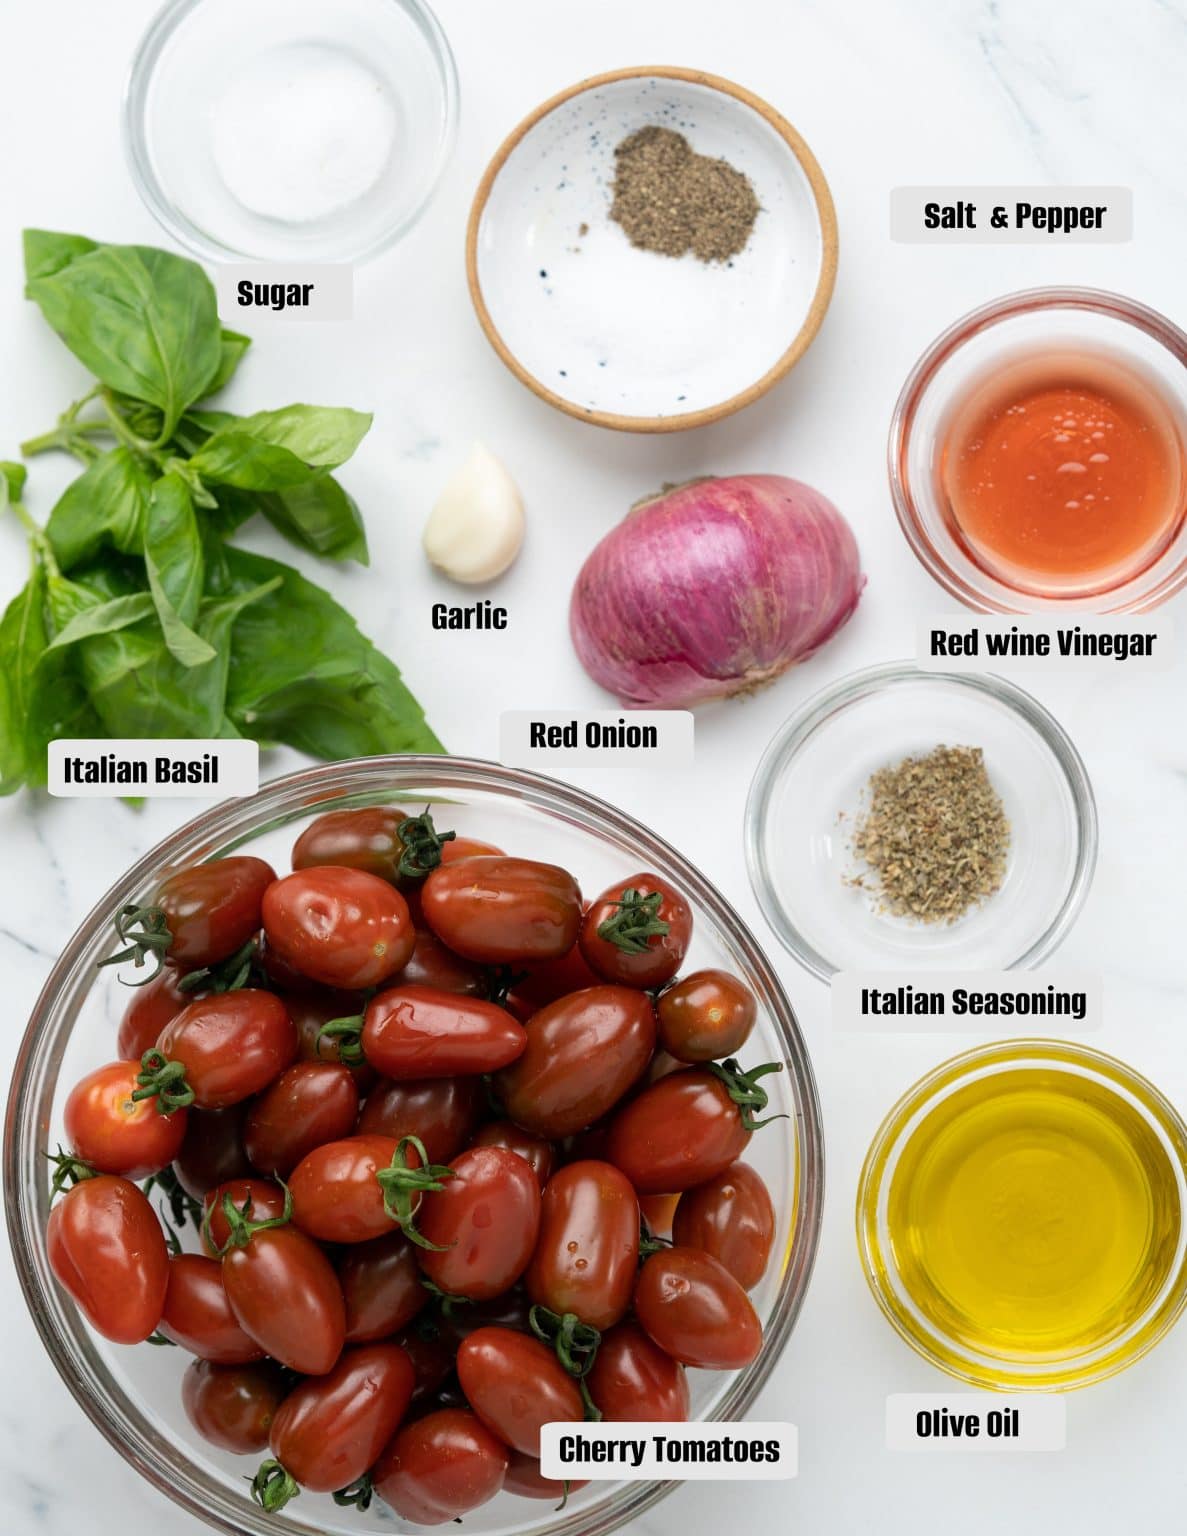 Summer Cherry Tomato Salad - The flavours of kitchen